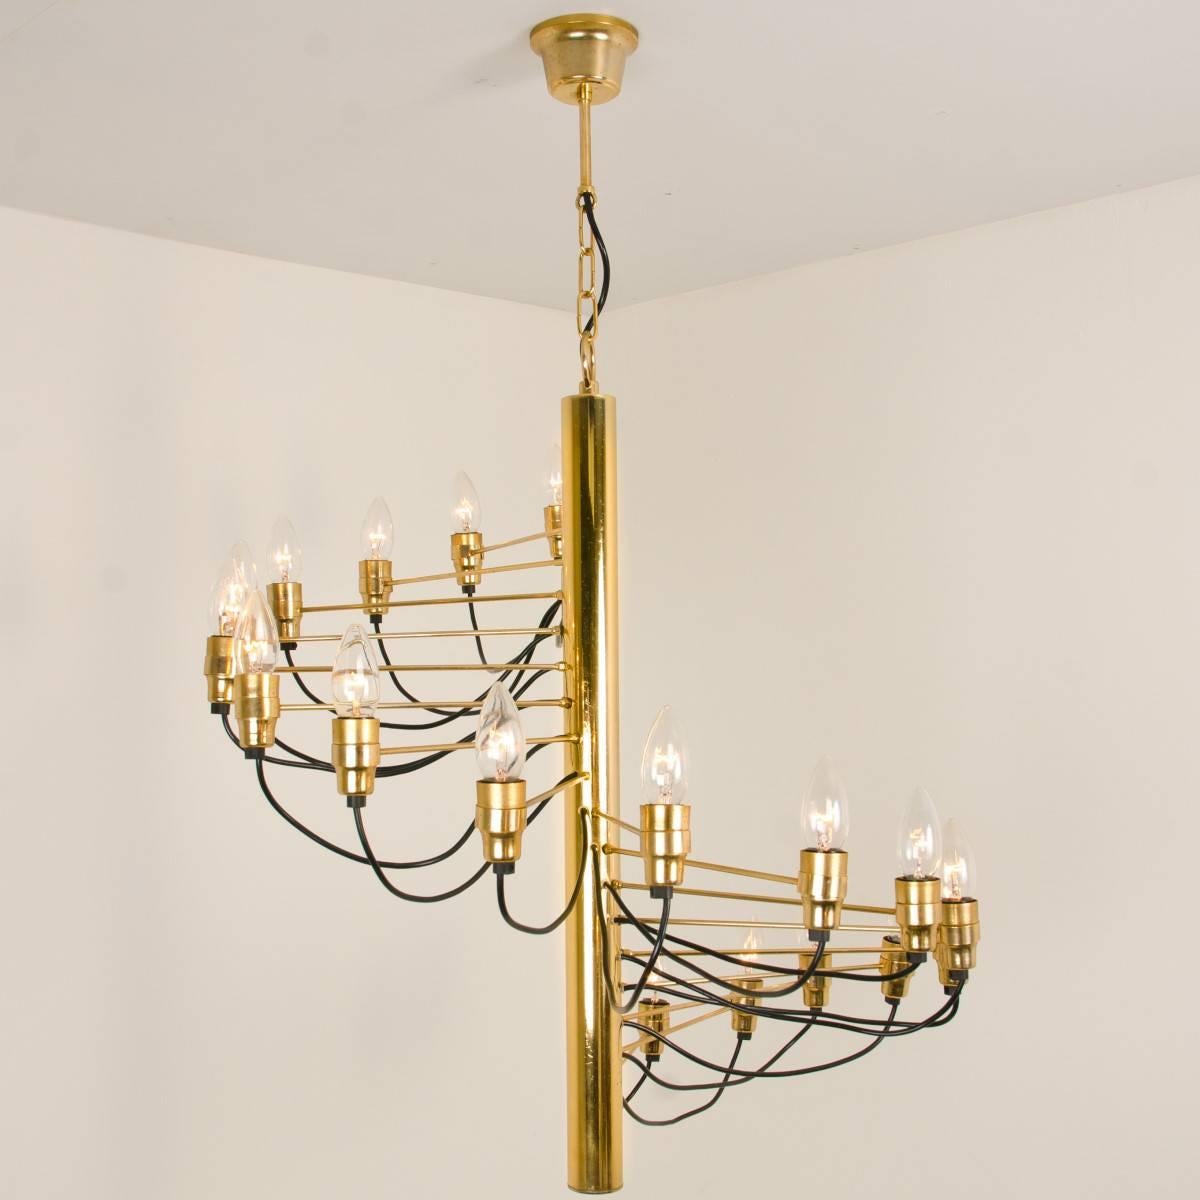 A iconic chandelier in the style of a design of Gino Sarfatti, Italy.
The chandelier was inspired by the archetype of the ancient chandelier.
The many brass-plated arms are screwed directly to the central stem which is also brass-plated. The 18